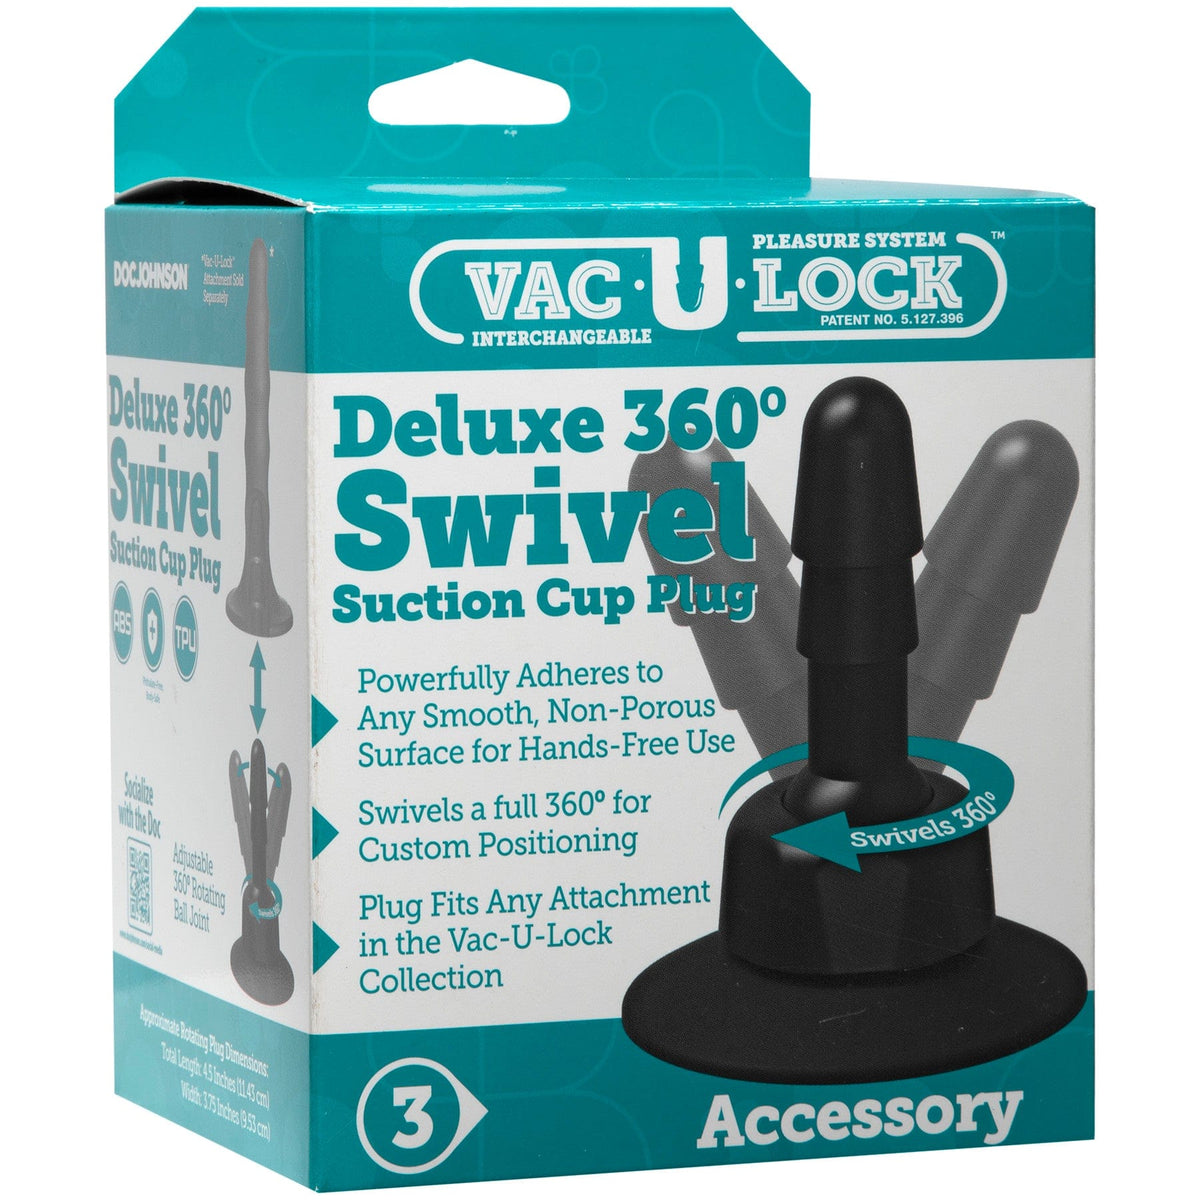 DELUXE 360 SWIVEL SUCTION CUP PLUG